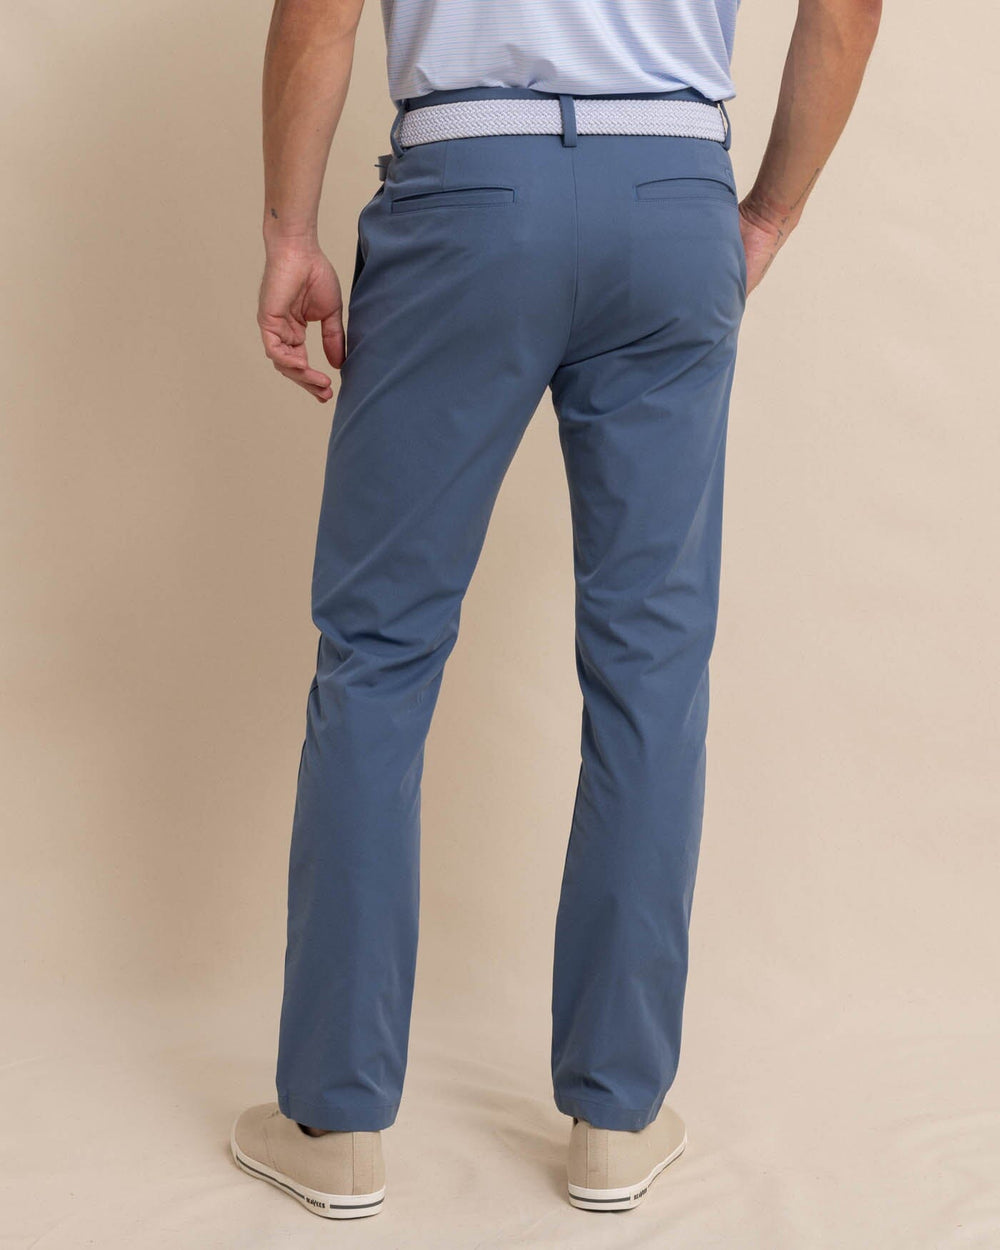 The back view of the Southern Tide Jack Performance Pant Dark Seas by Southern Tide - Dark Seas